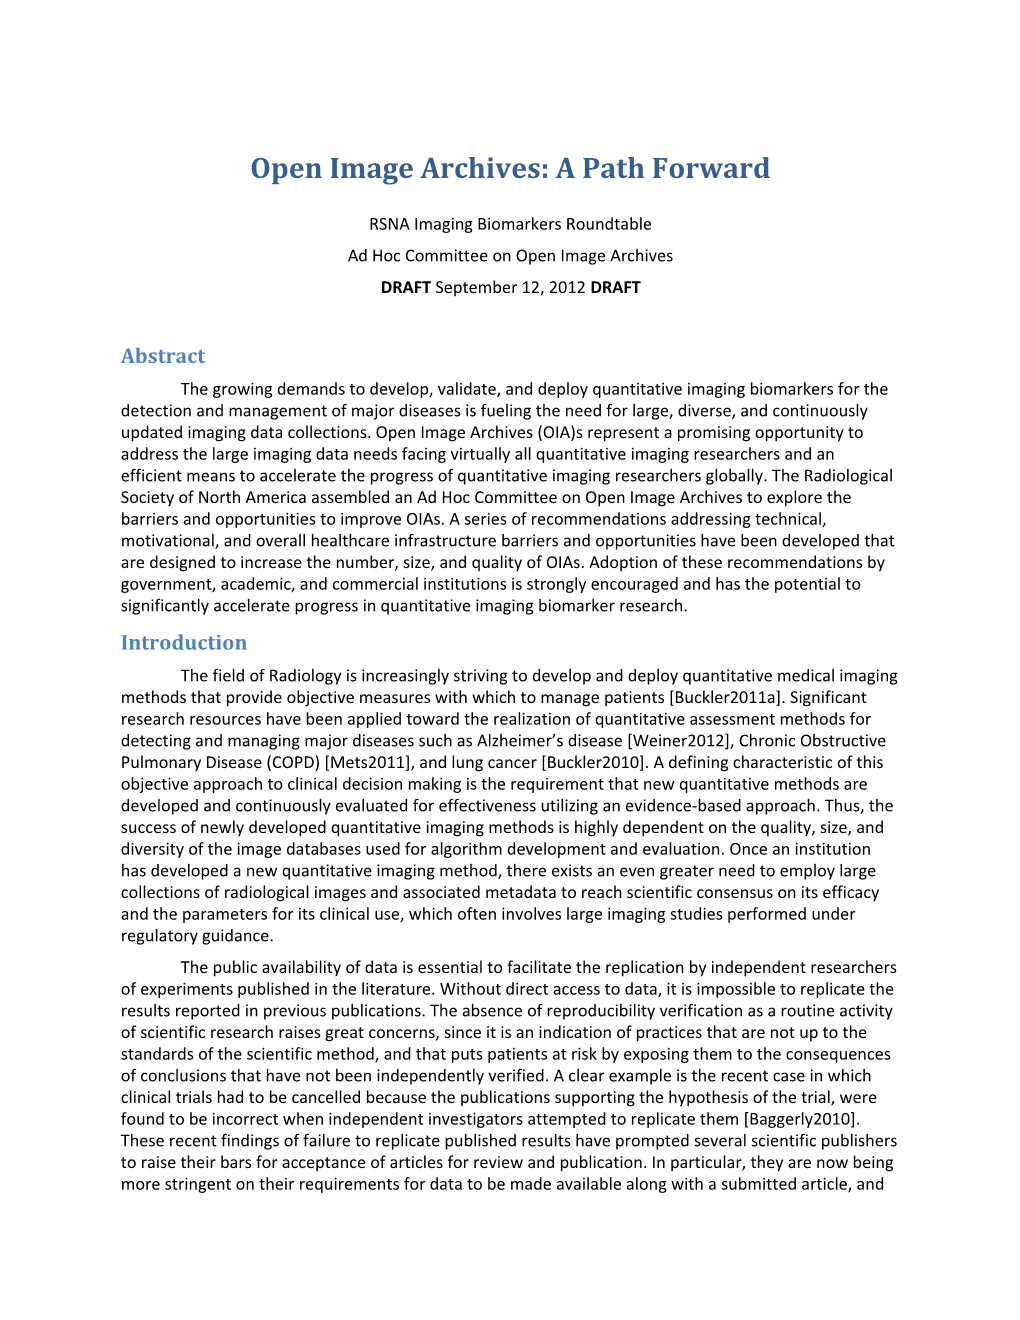 Open Image Archives: a Path Forward